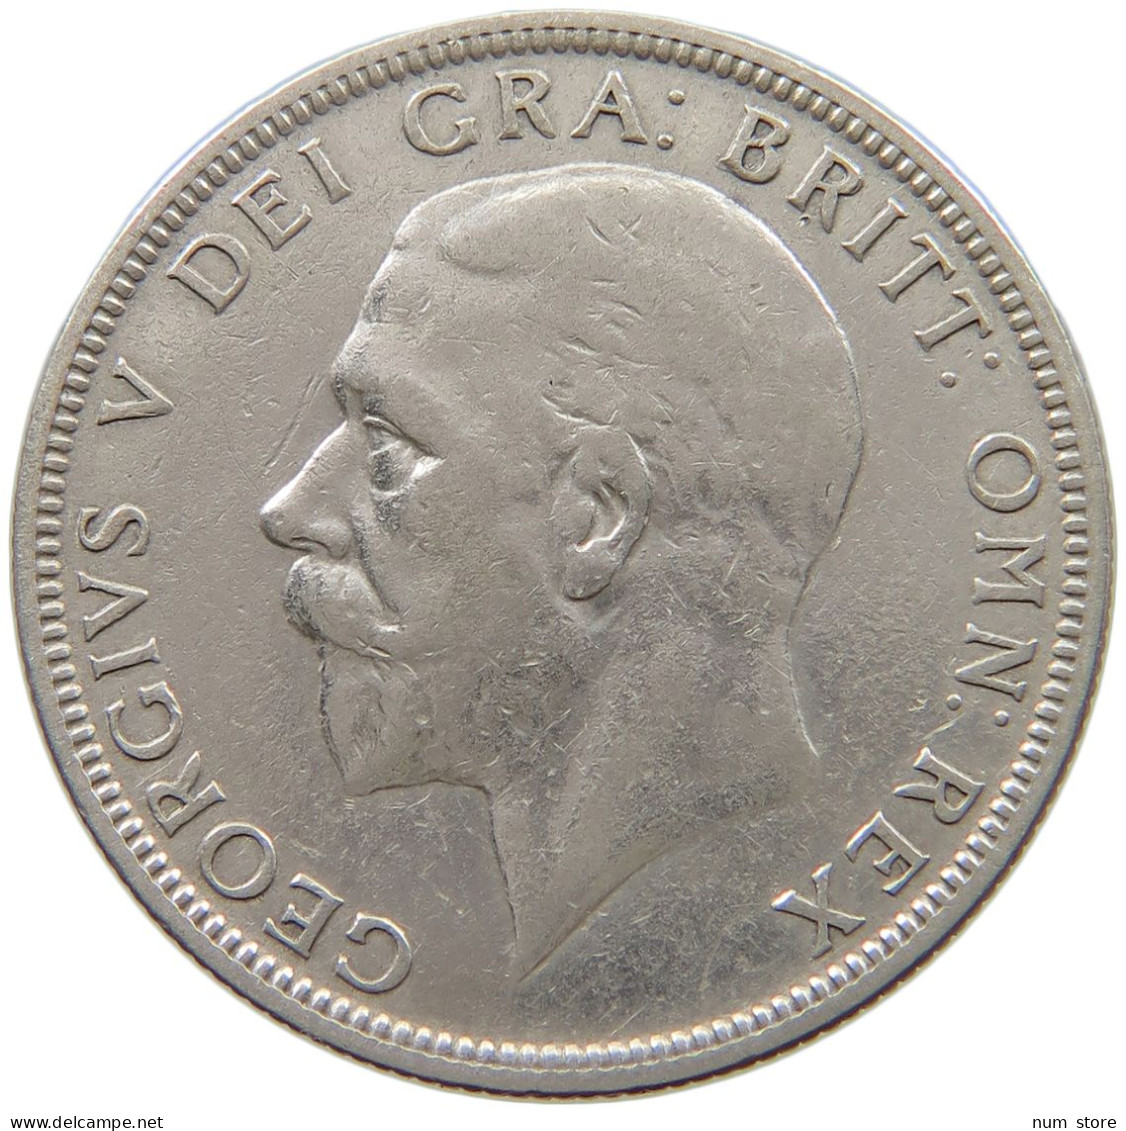 GREAT BRITAIN FLORIN 1928 George V. (1910-1936) #a090 0693 - J. 1 Florin / 2 Shillings